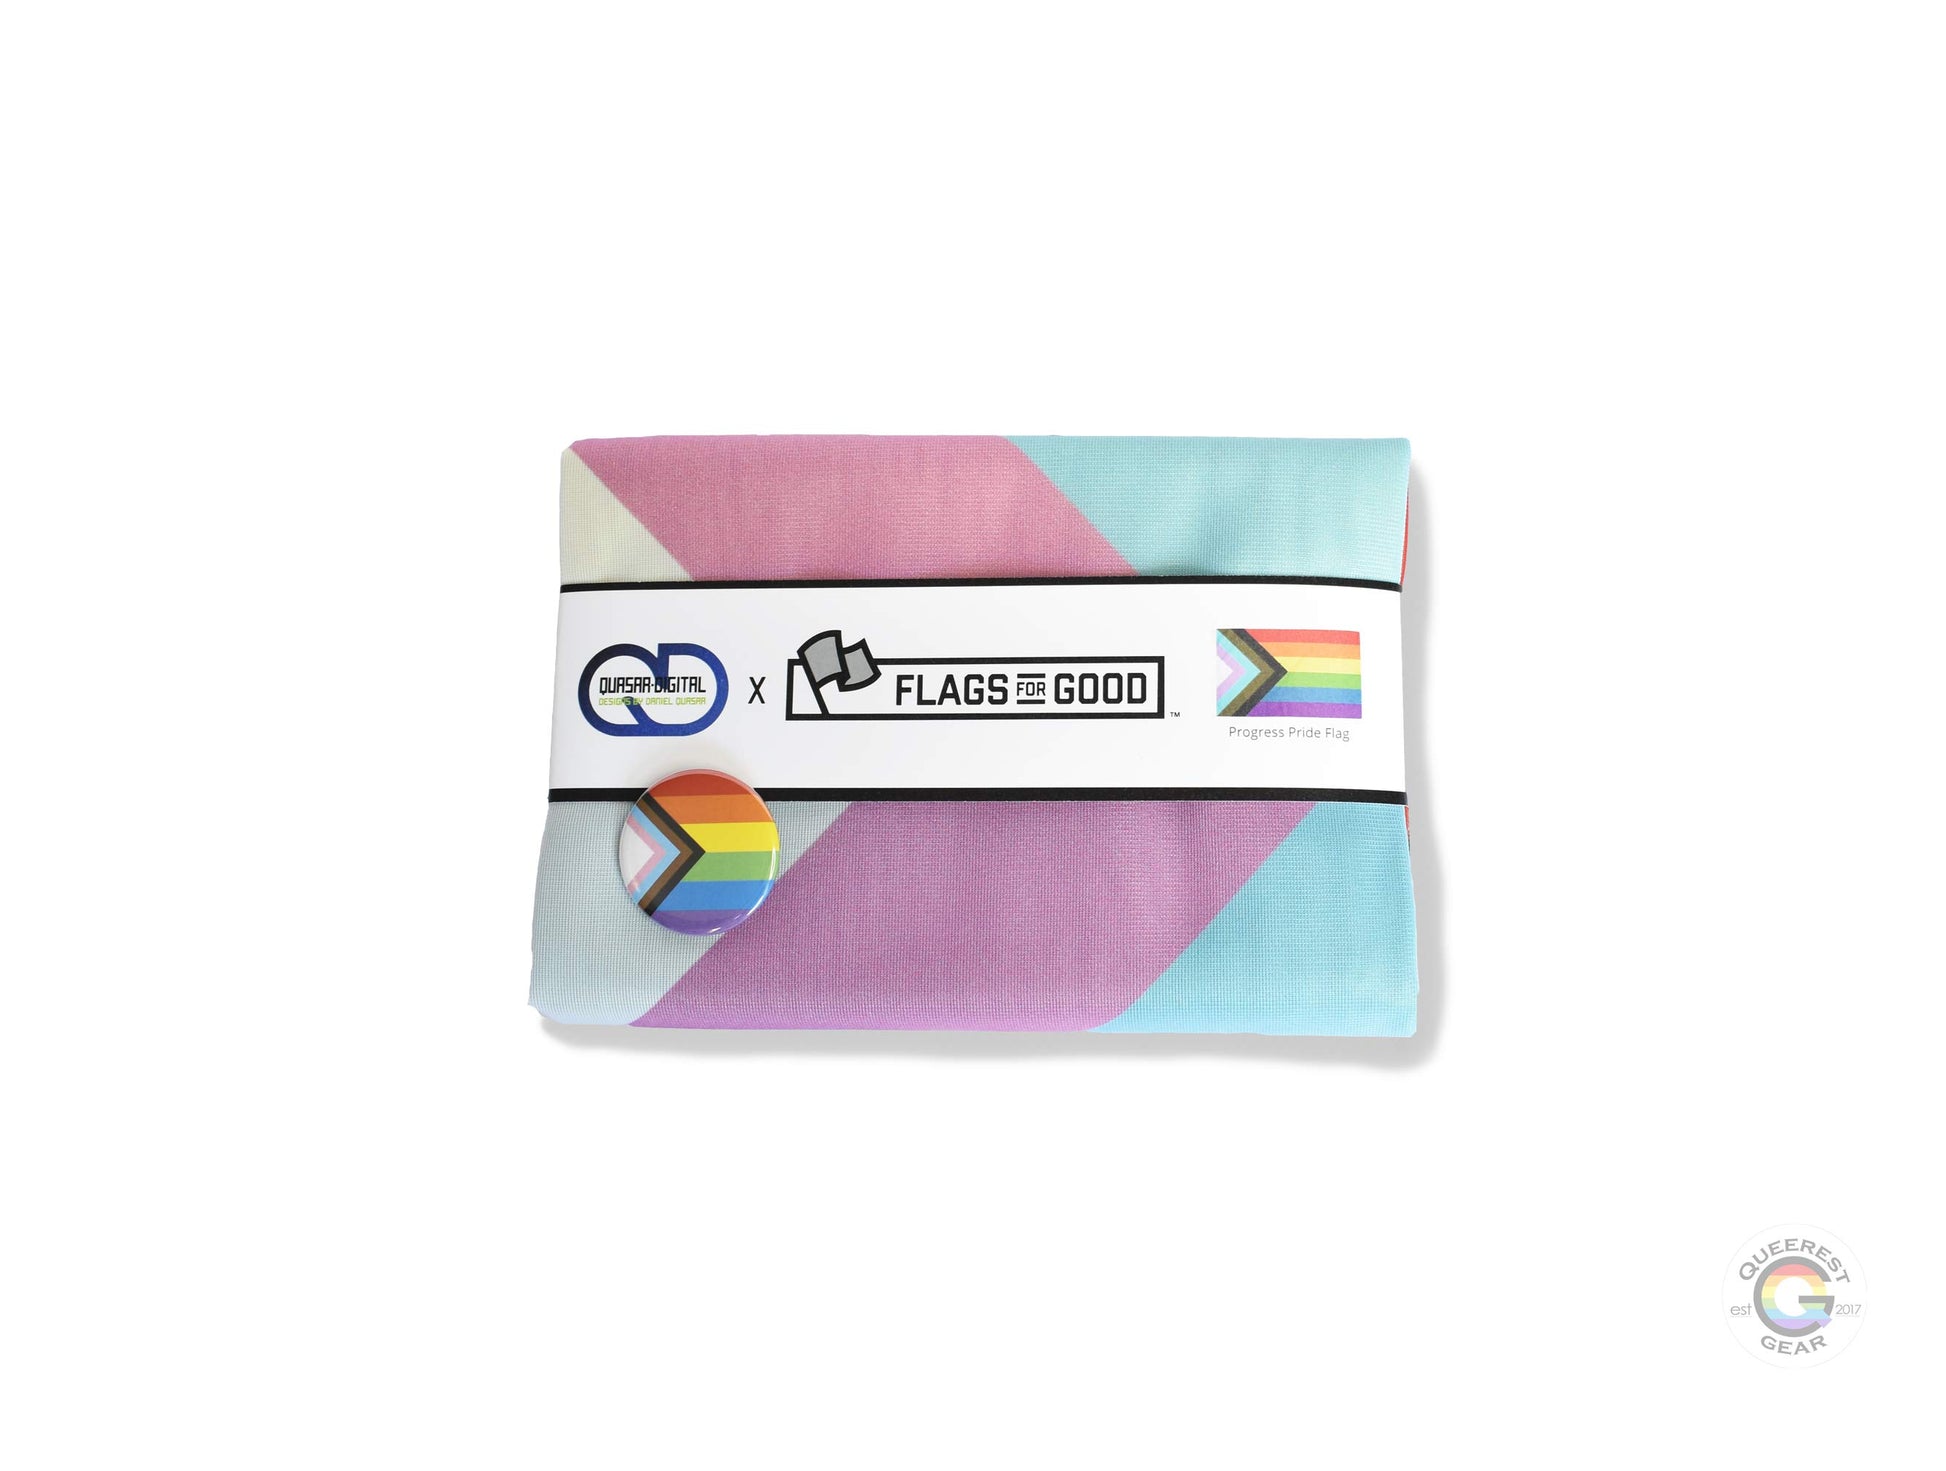 The progress pride flag folded in its packaging with the matching free progress flag button